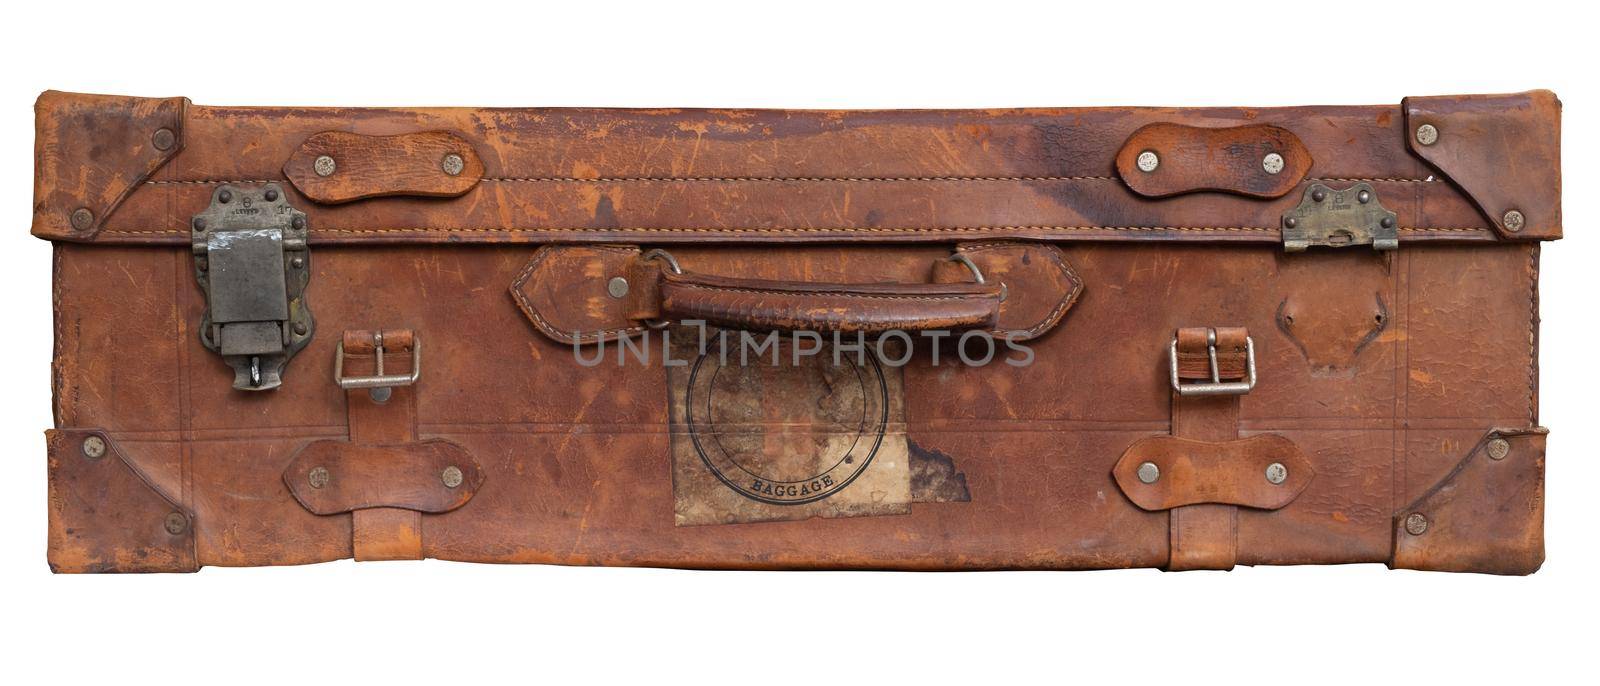 Retro Vintage Old Brown Suitcase Or Luggage Isolated On A White Background